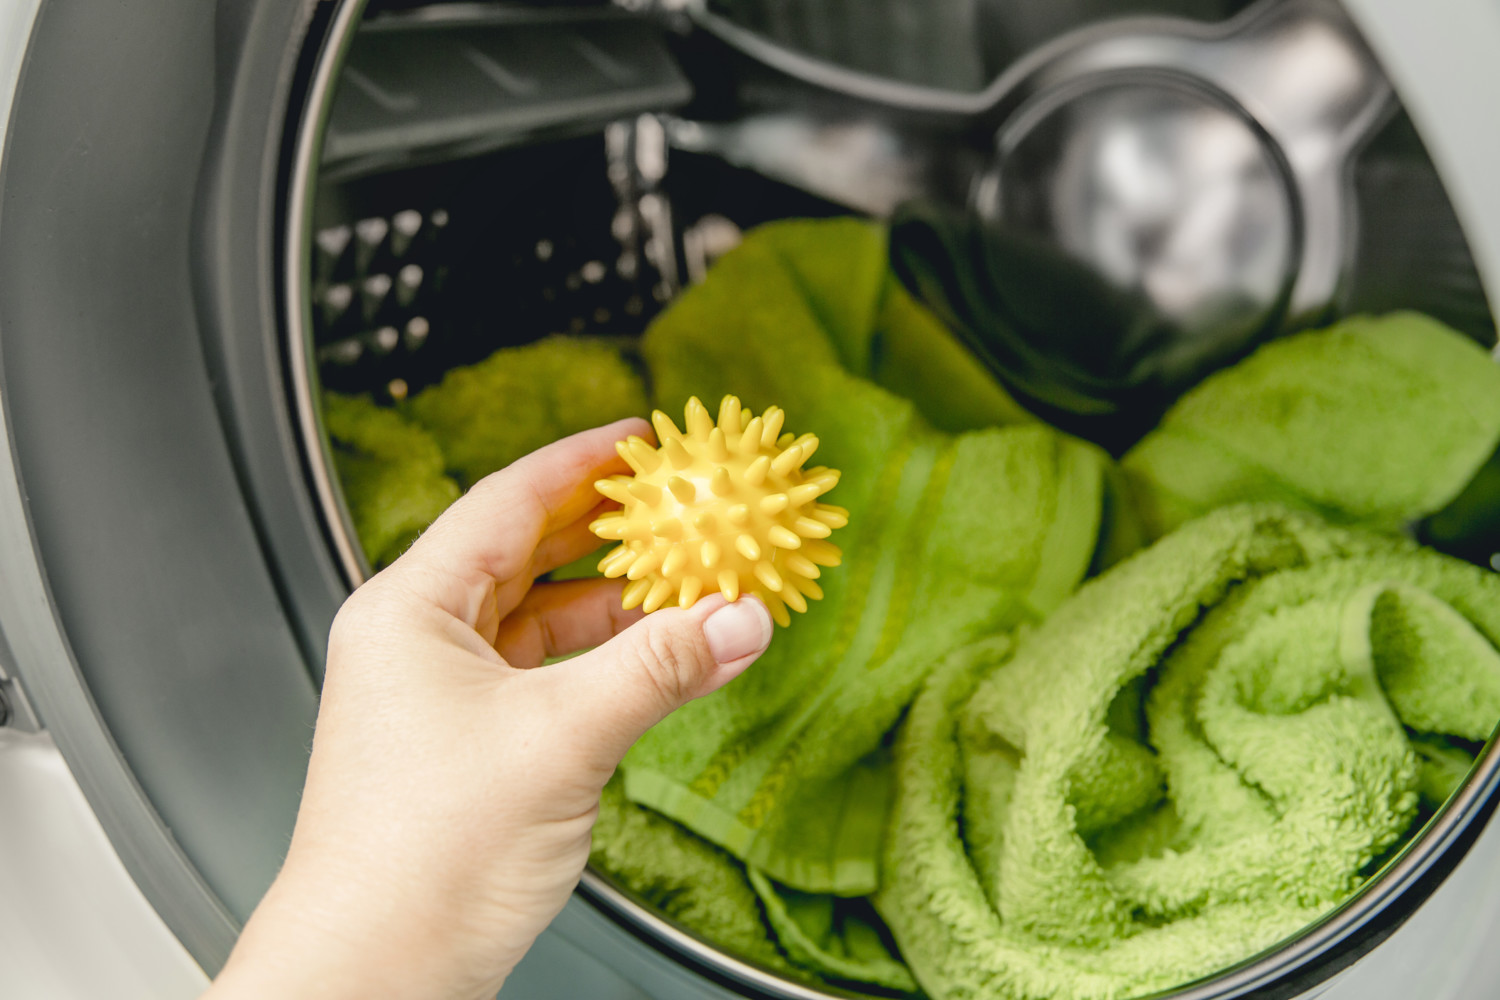 Are Dryer Sheets Safe?